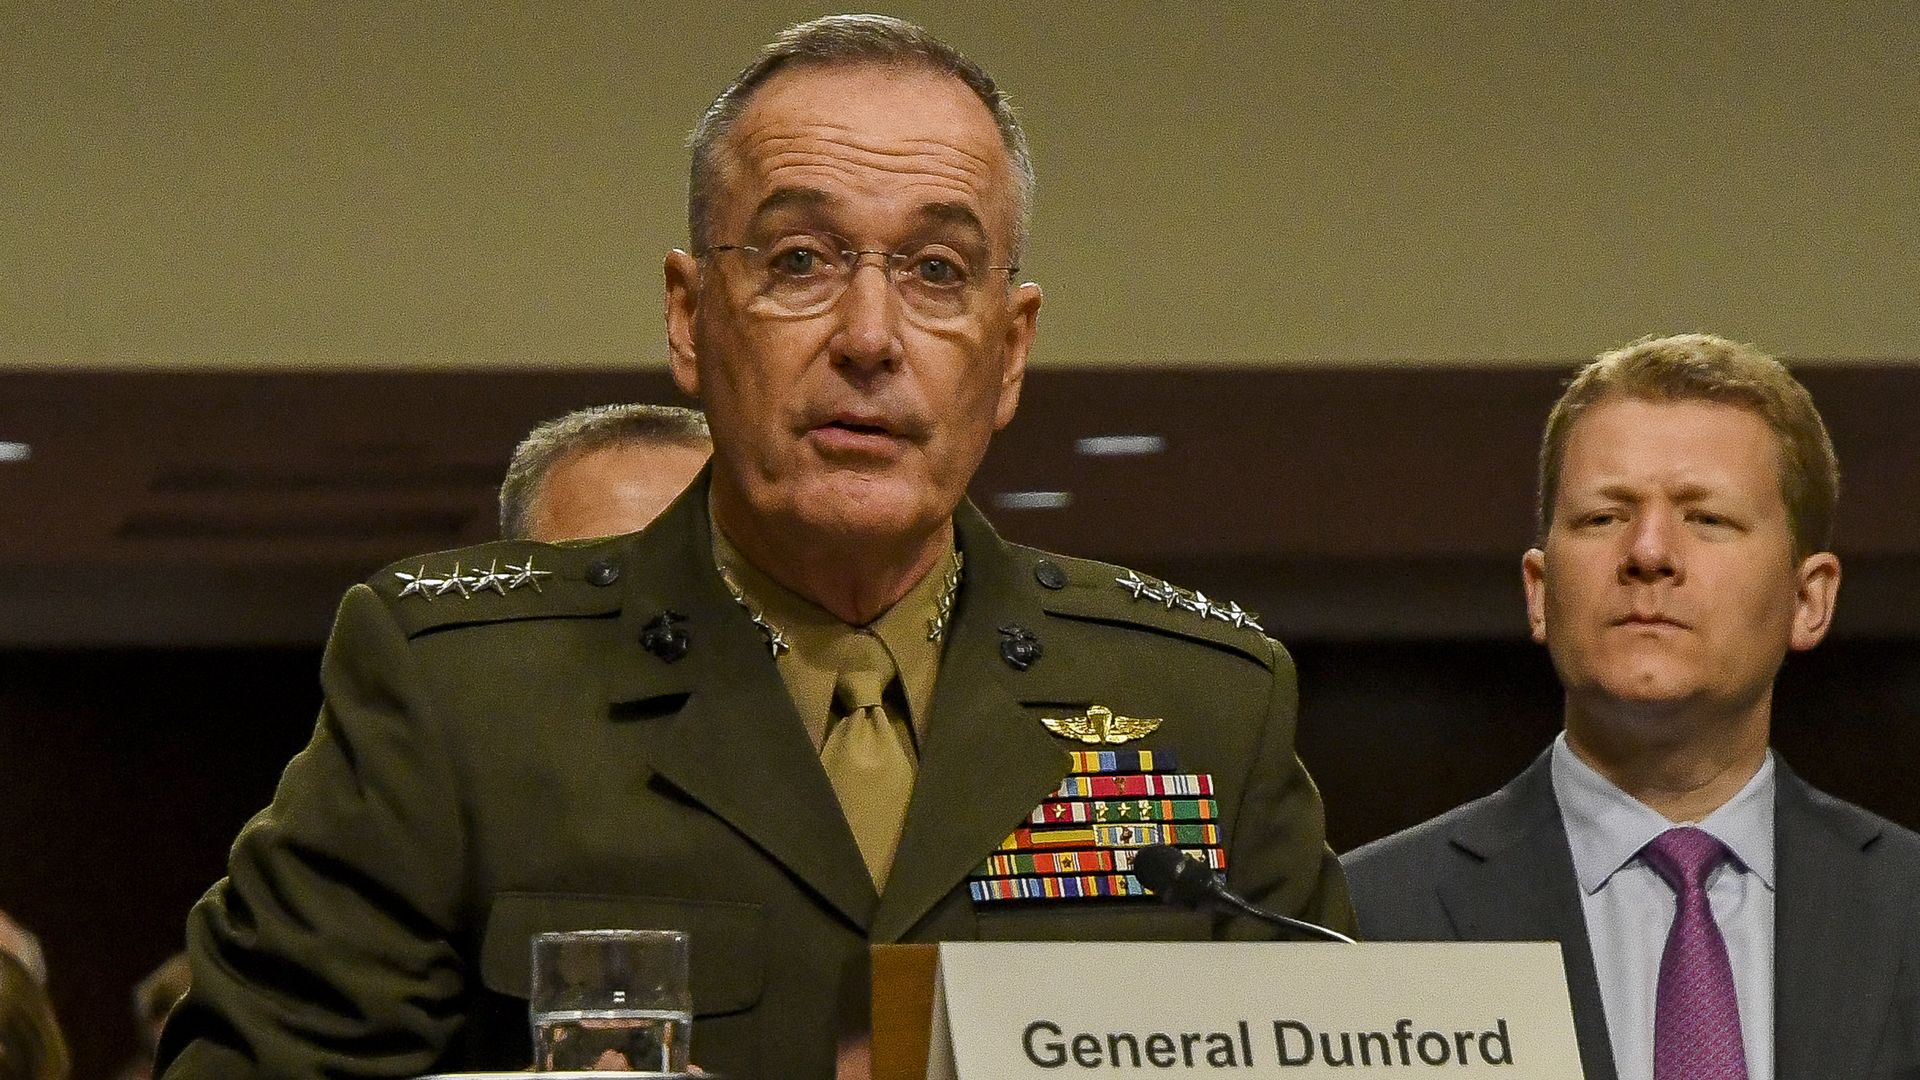 American military commander and Chariman of the Joint Chiefs of Staff General Joseph Dunford as he appears before the Senate Armed Services Committee during a budget hearing, Washington DC.